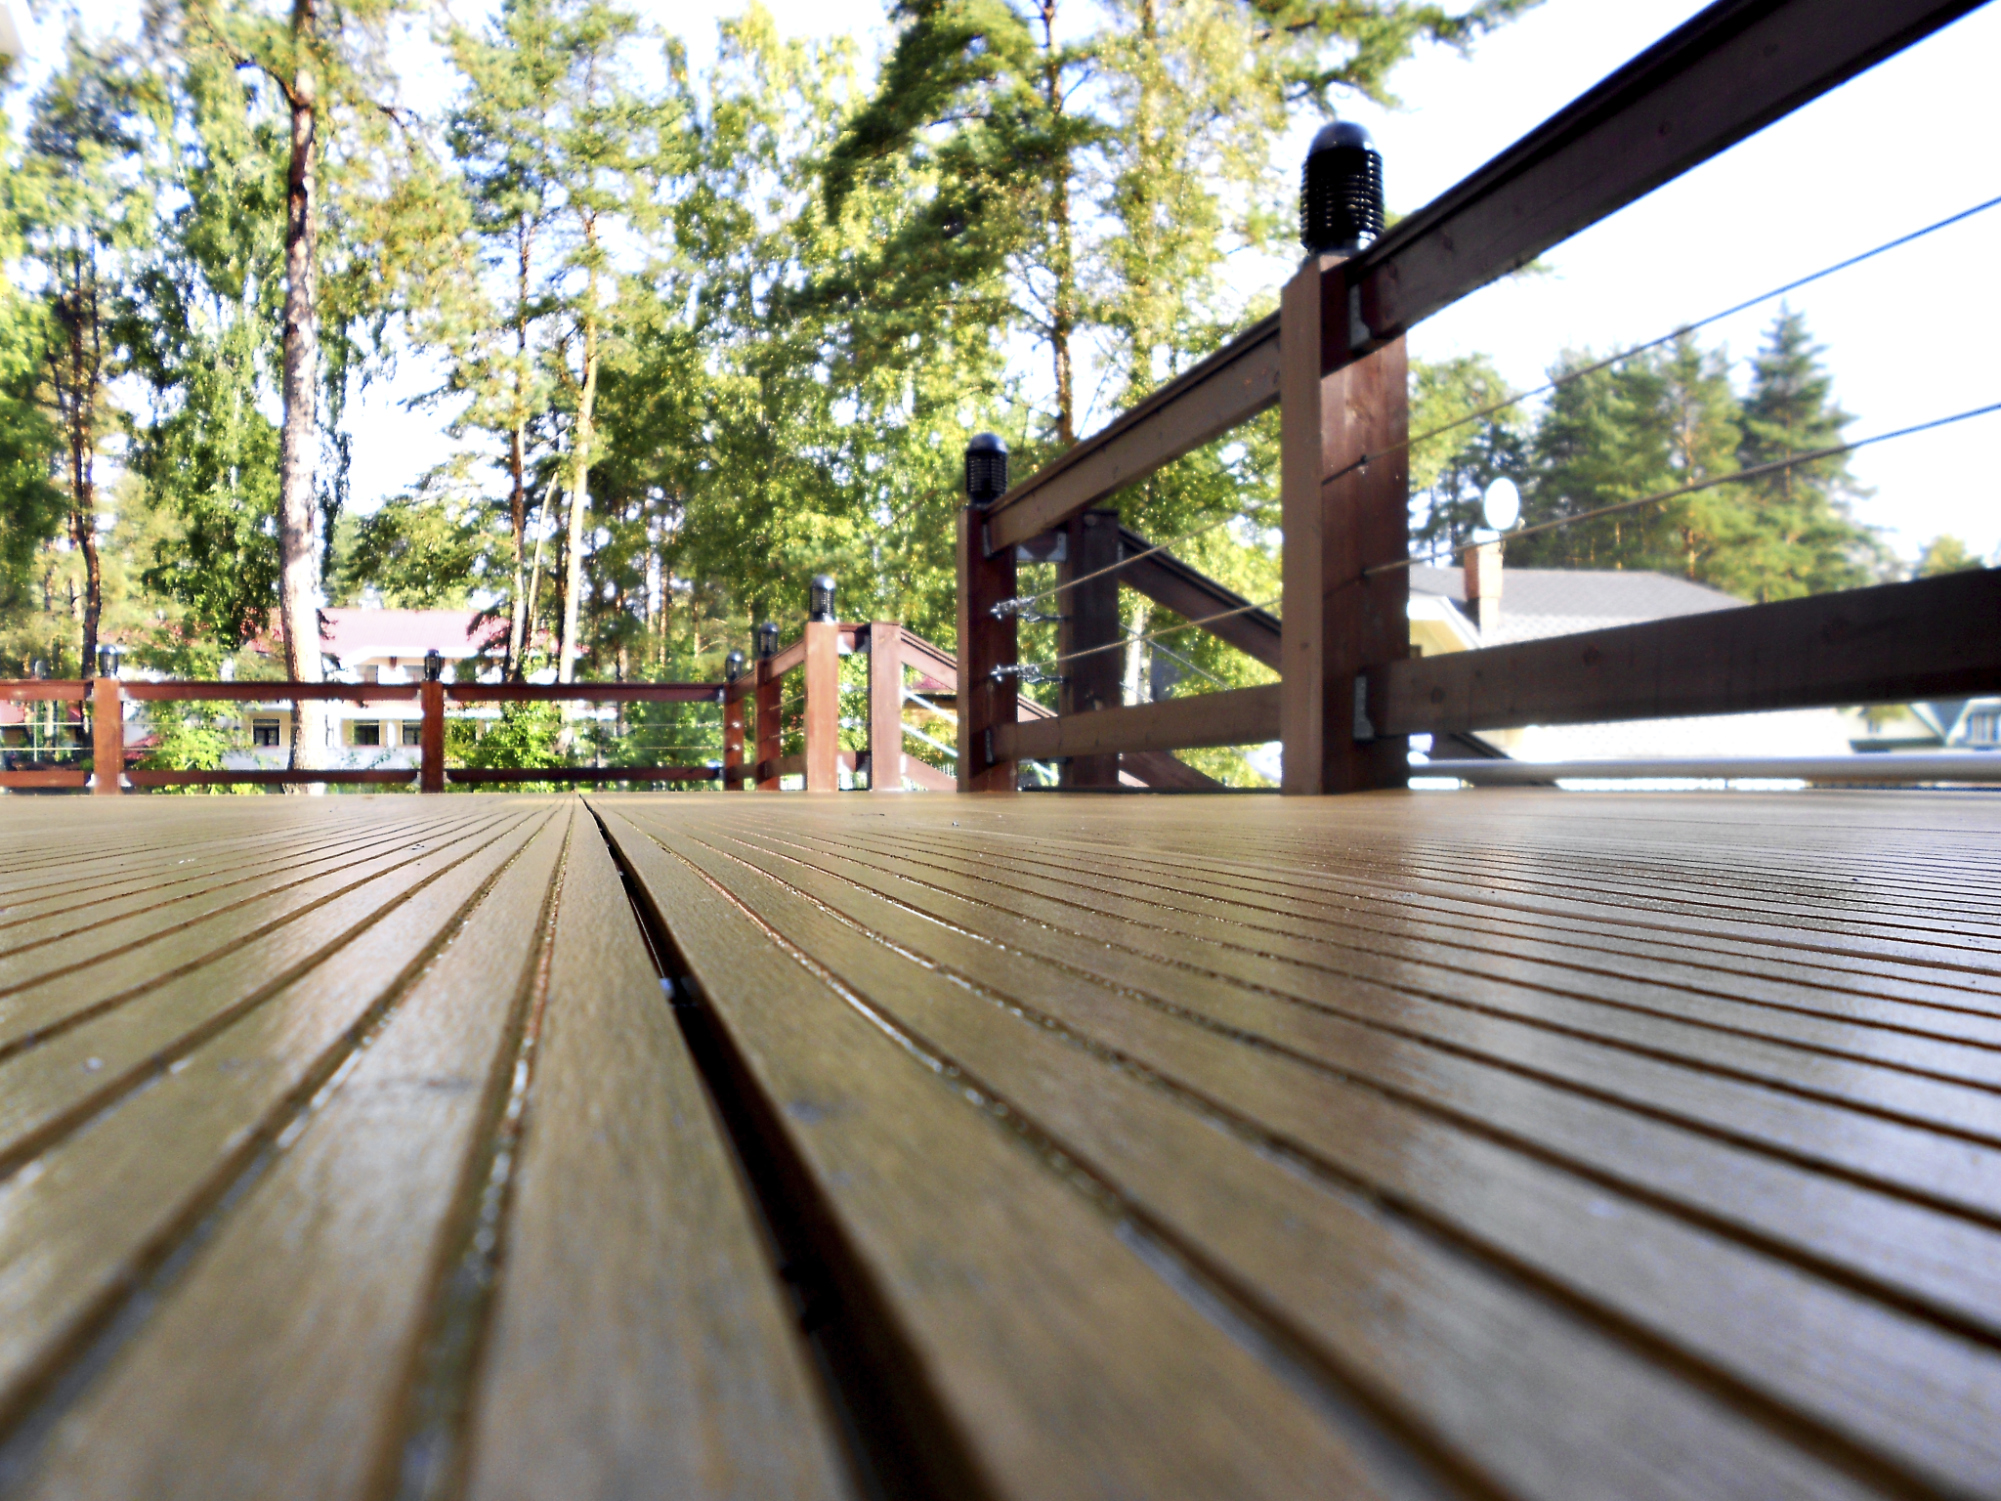 How To Protect Your Wood Deck From Winter Weather